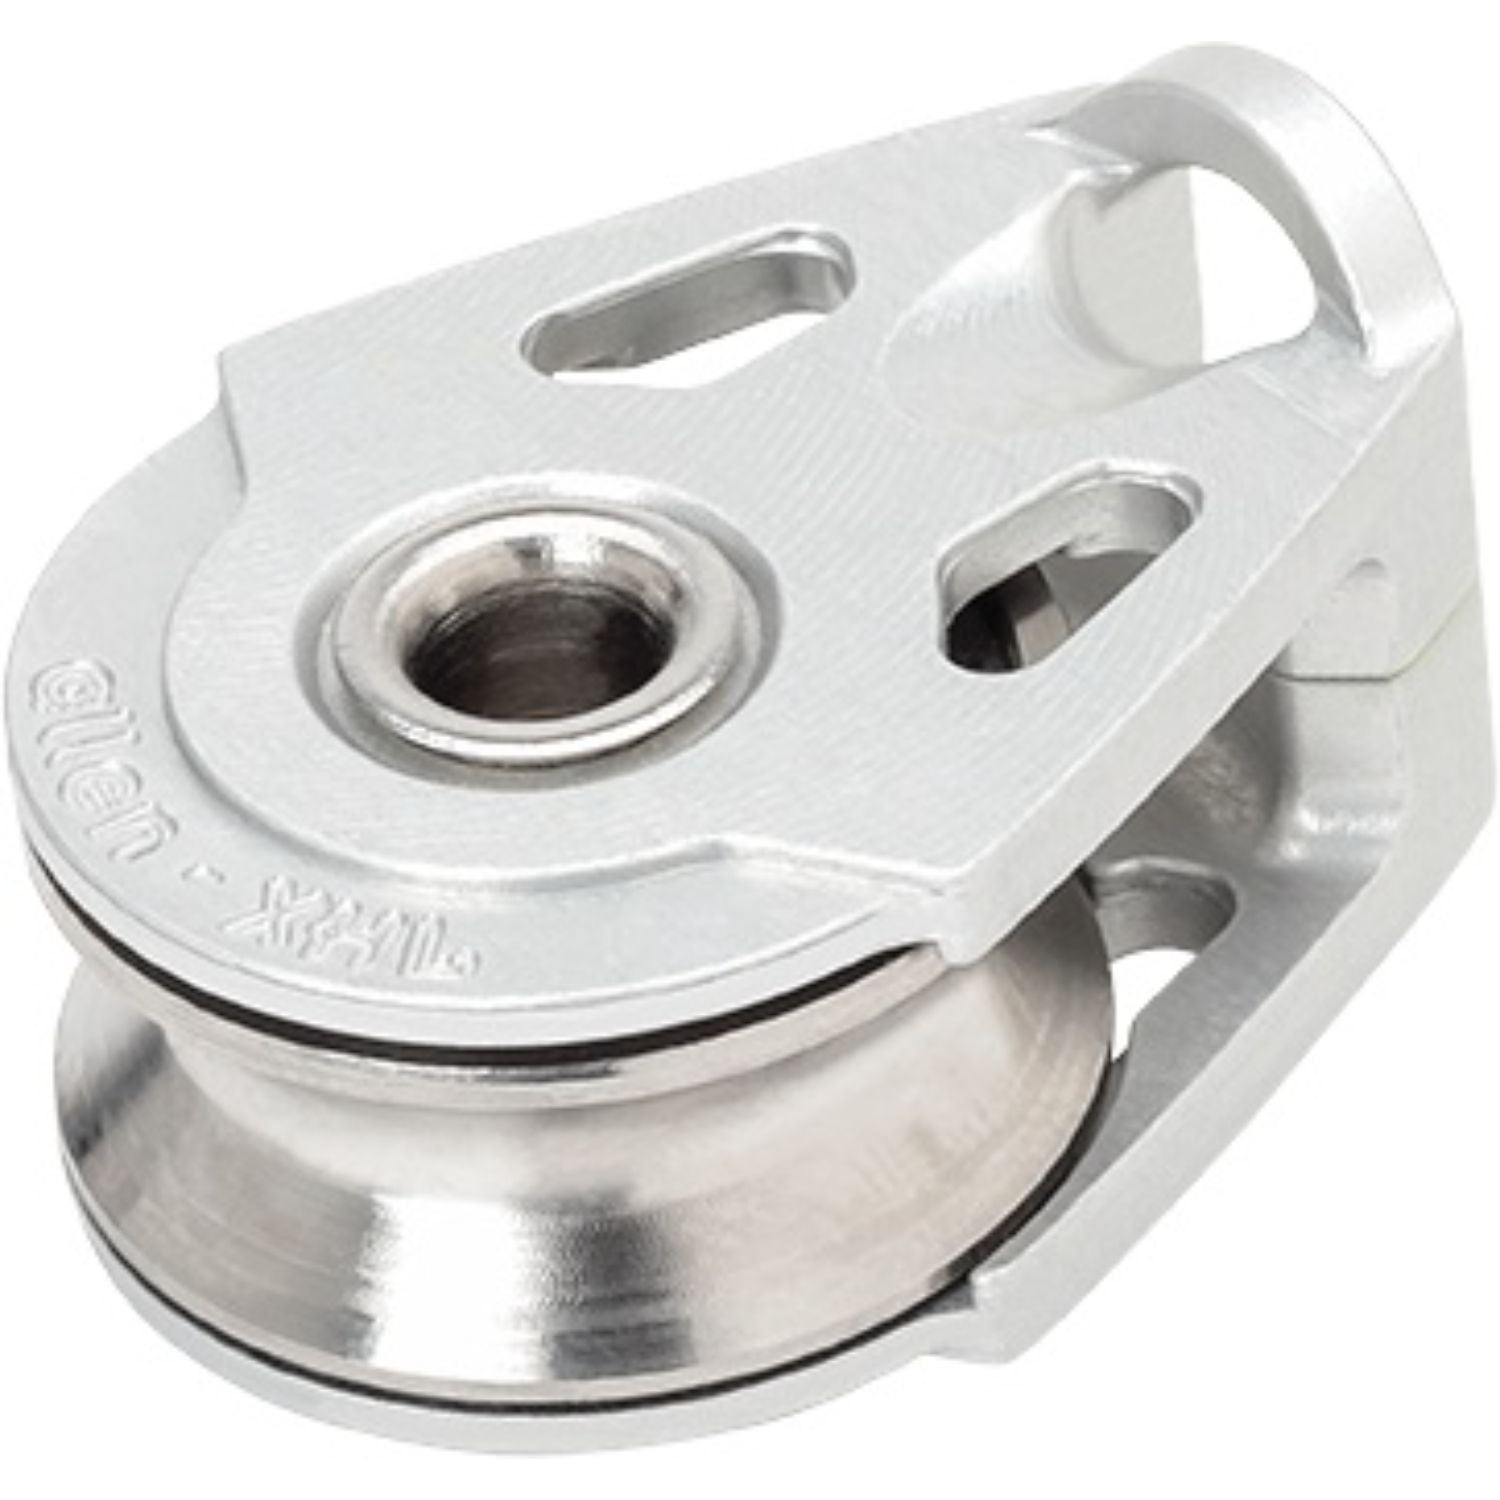 Allen Dynamic 20mm Extreme High Load Block, Silver